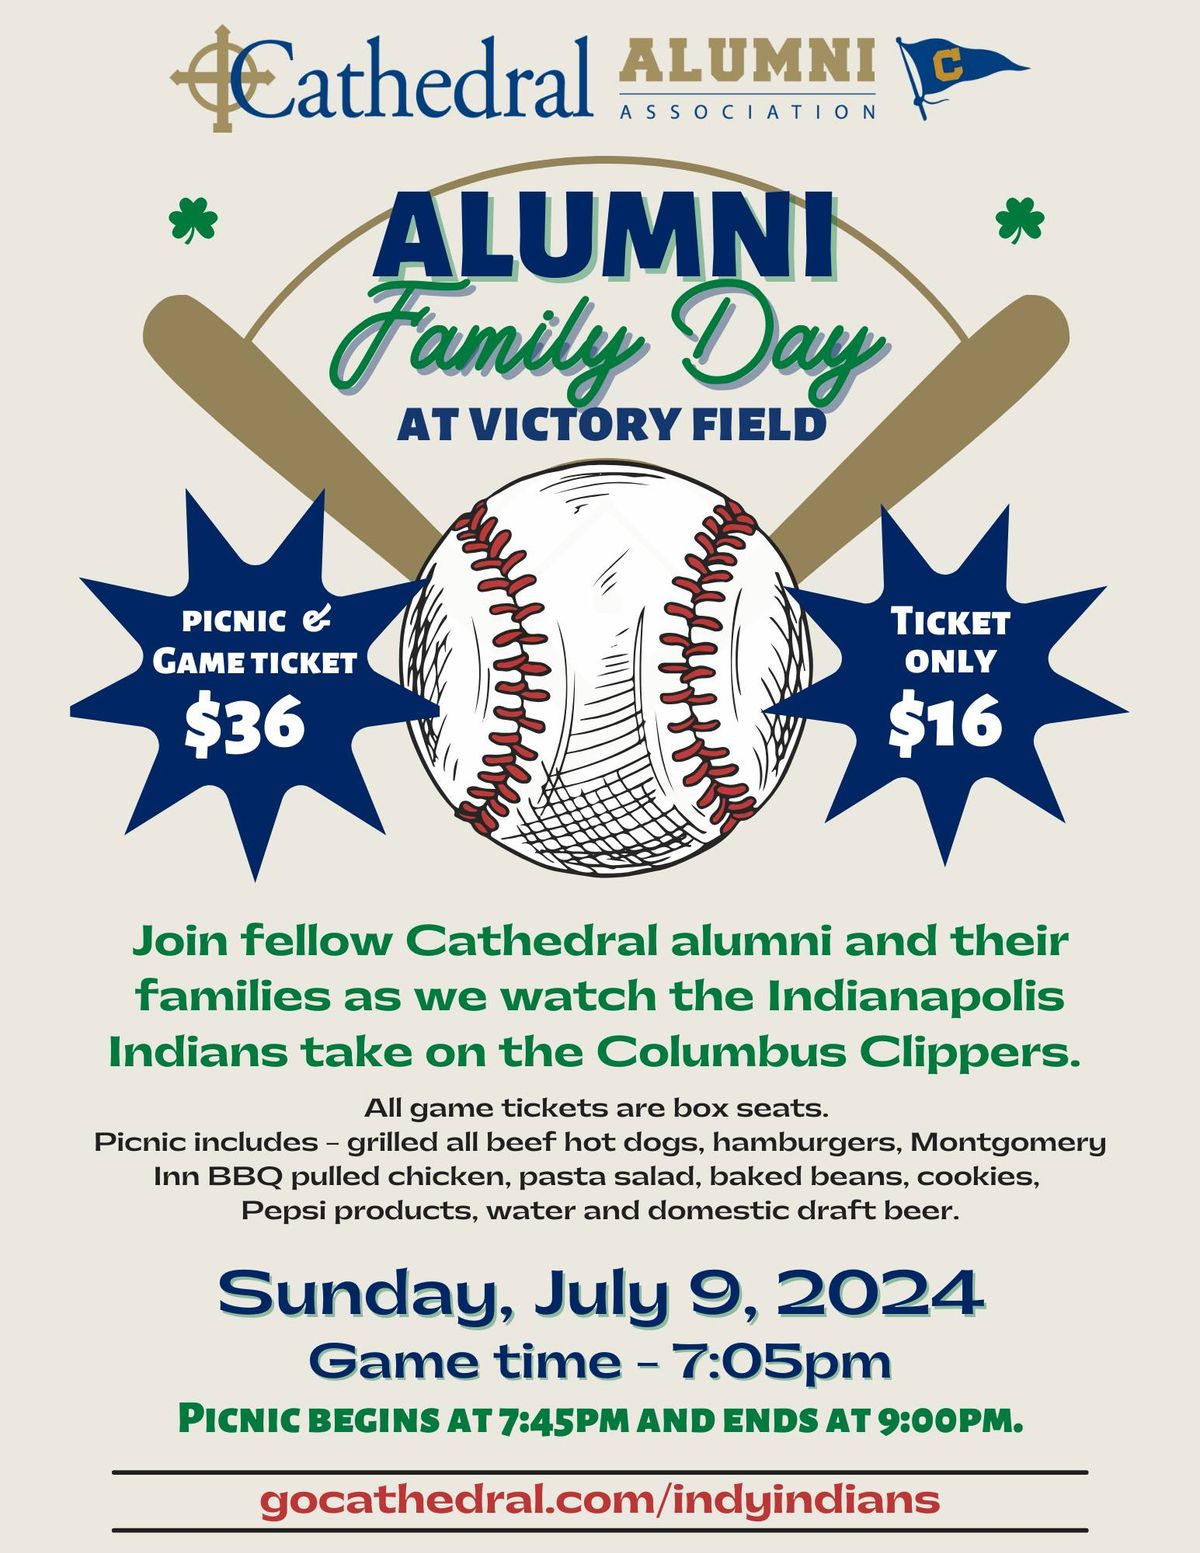 Cathedral Alumni Family Day at Victory Field